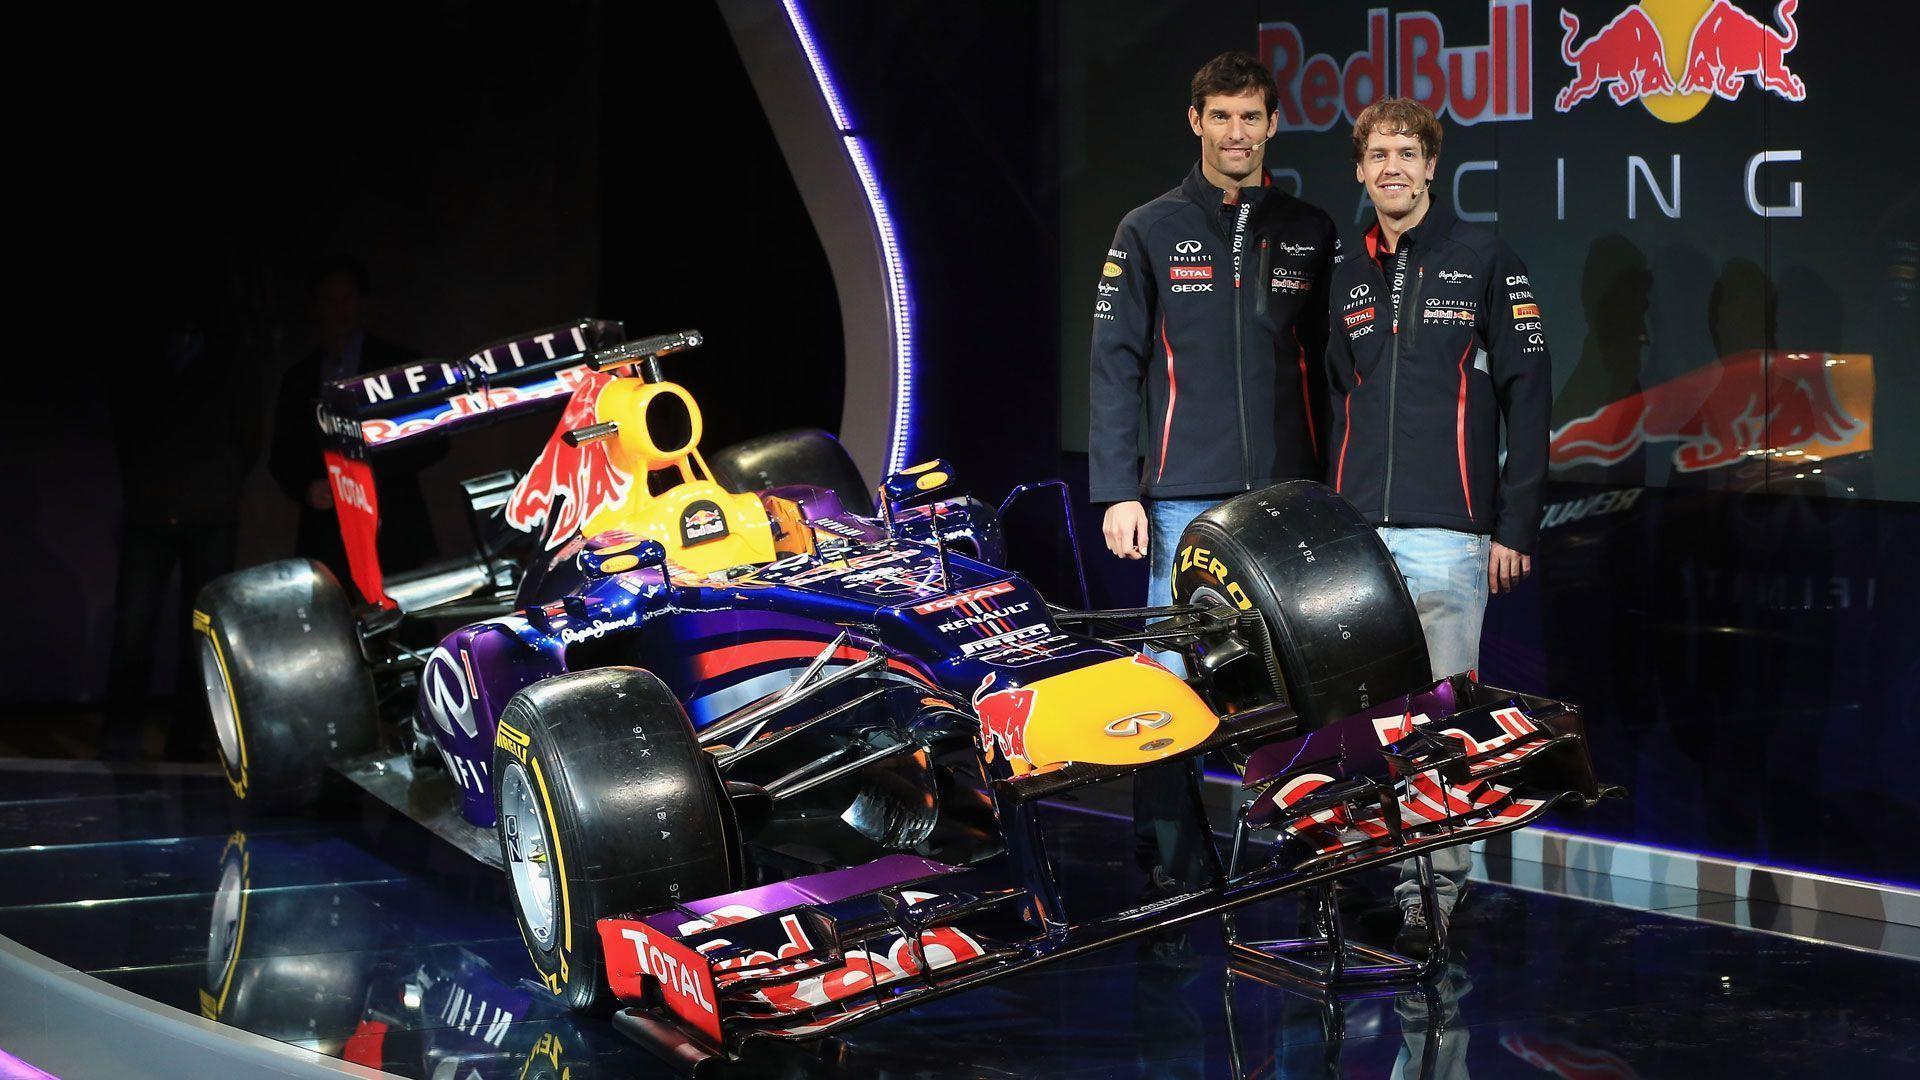 HD picture 2013 Launch Red Bull RB9 F1 car